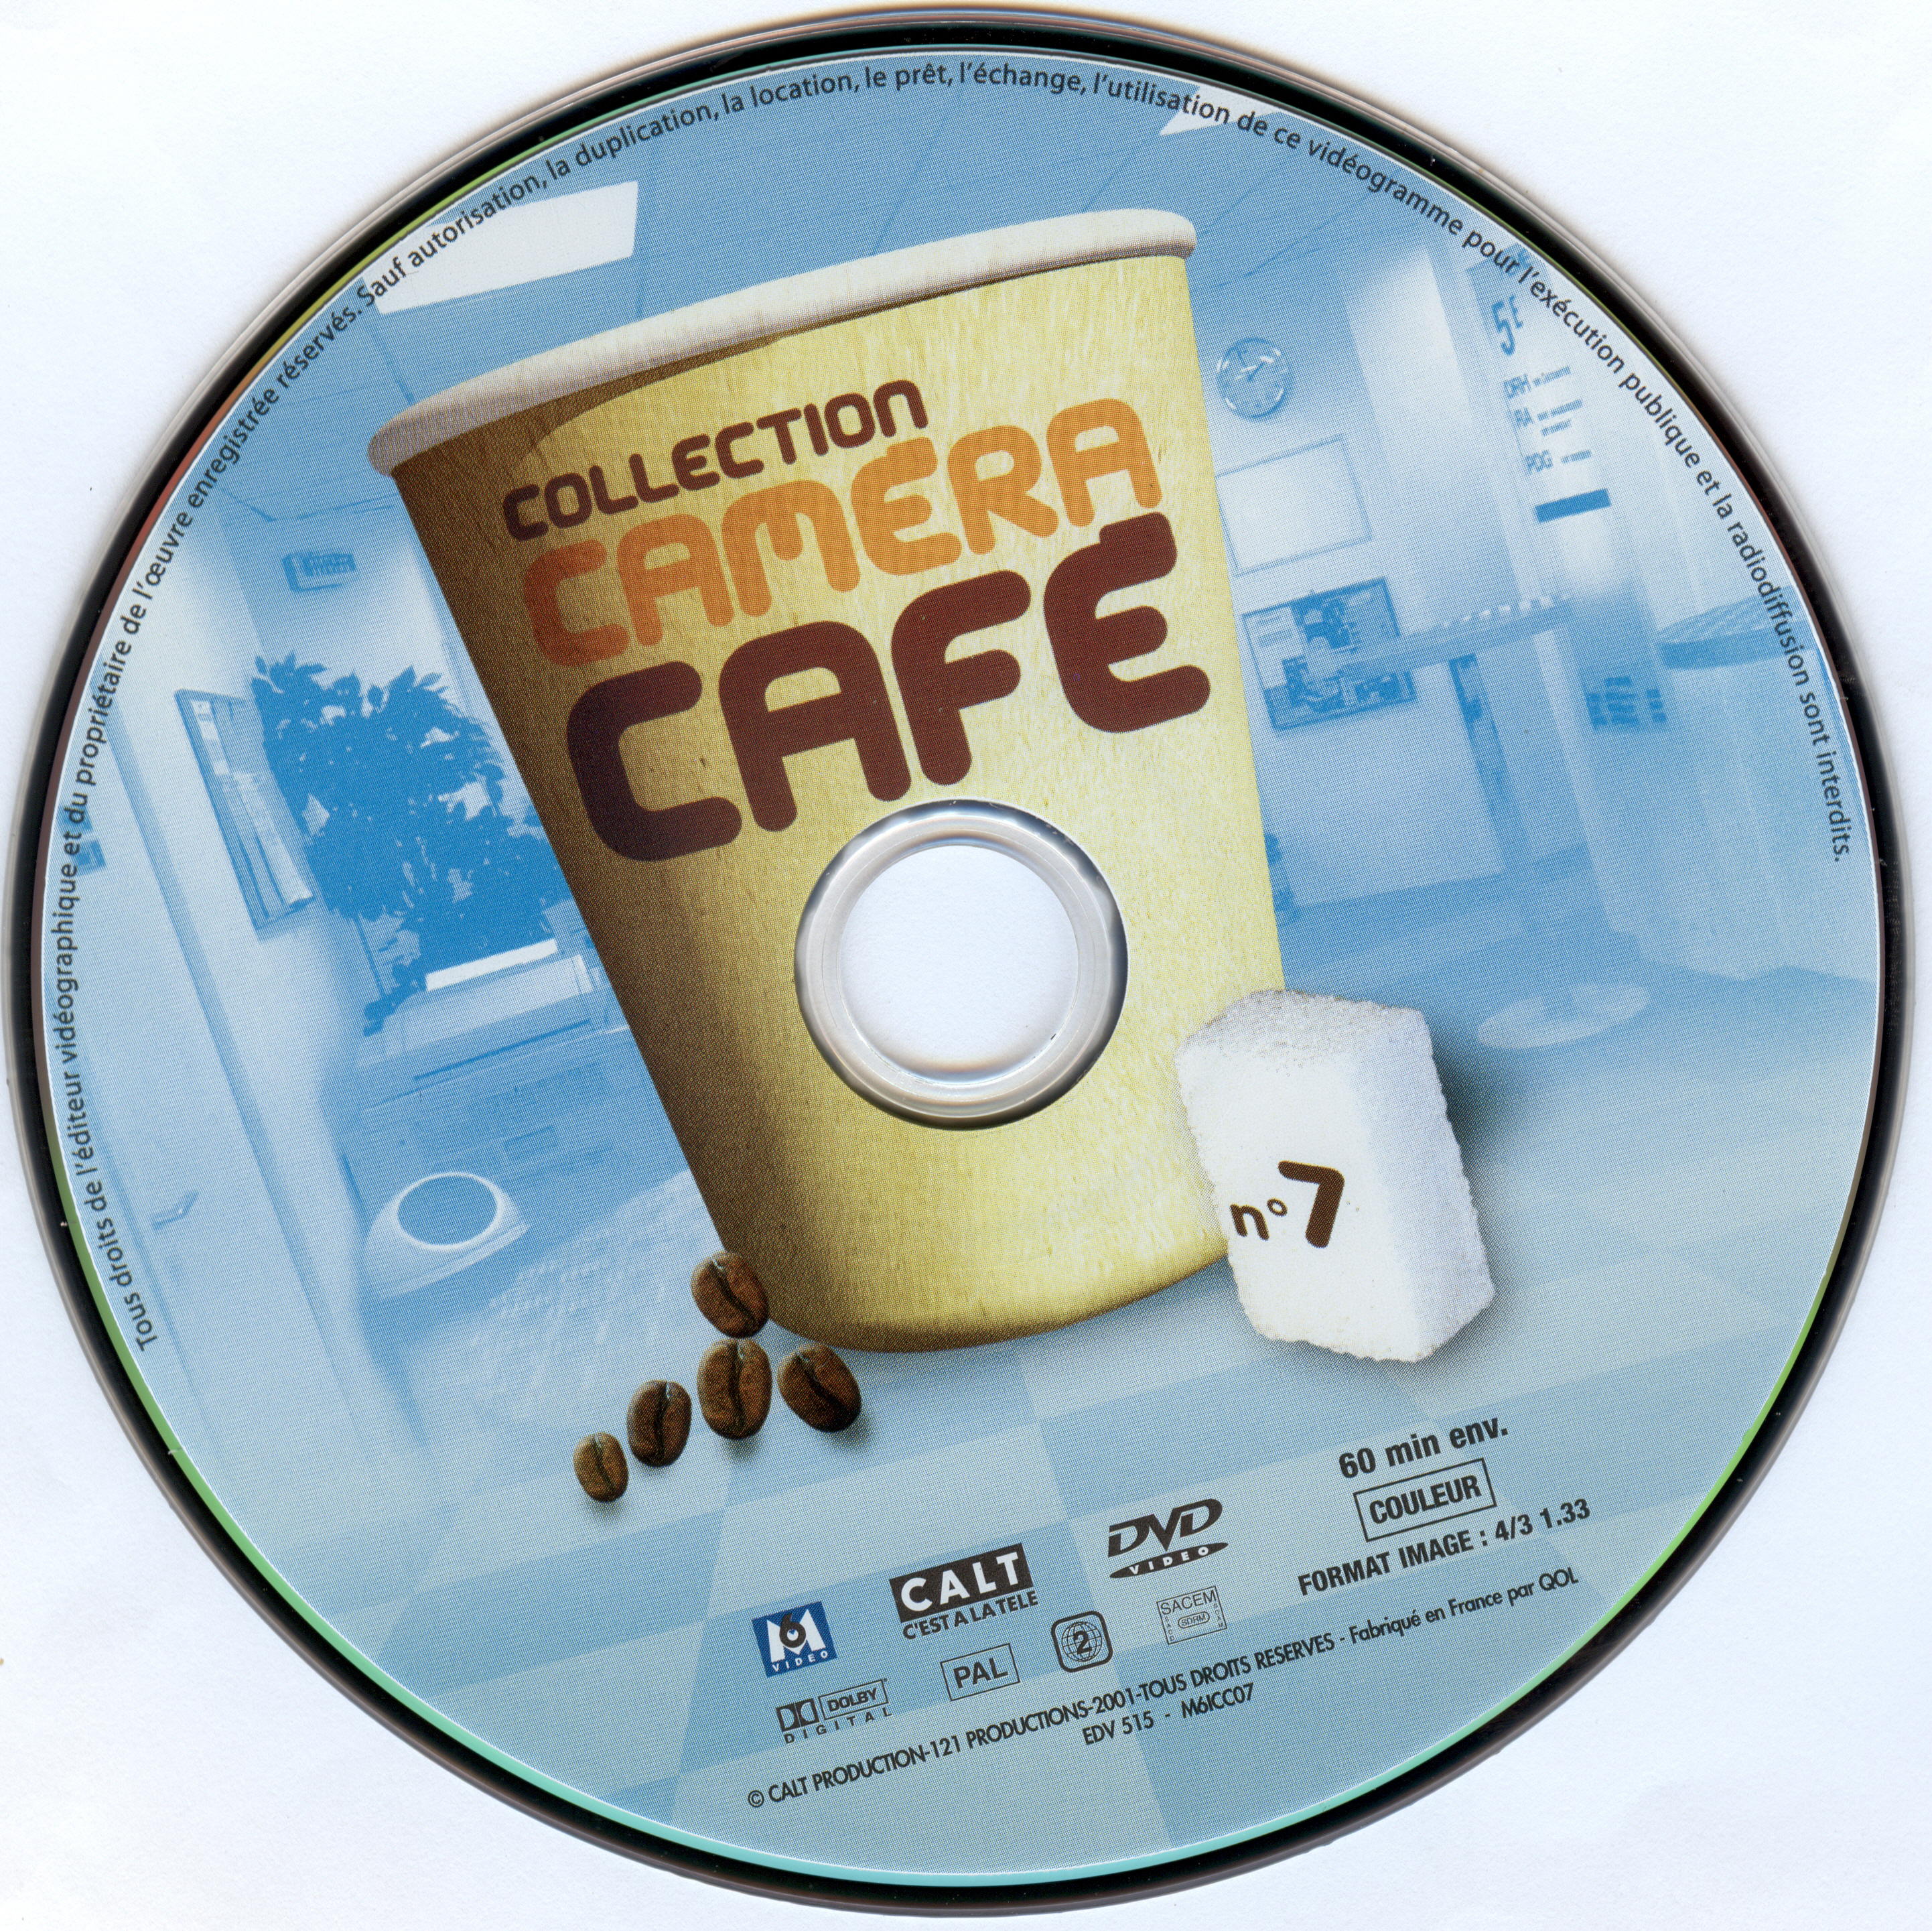 Collection Camera Cafe vol 07